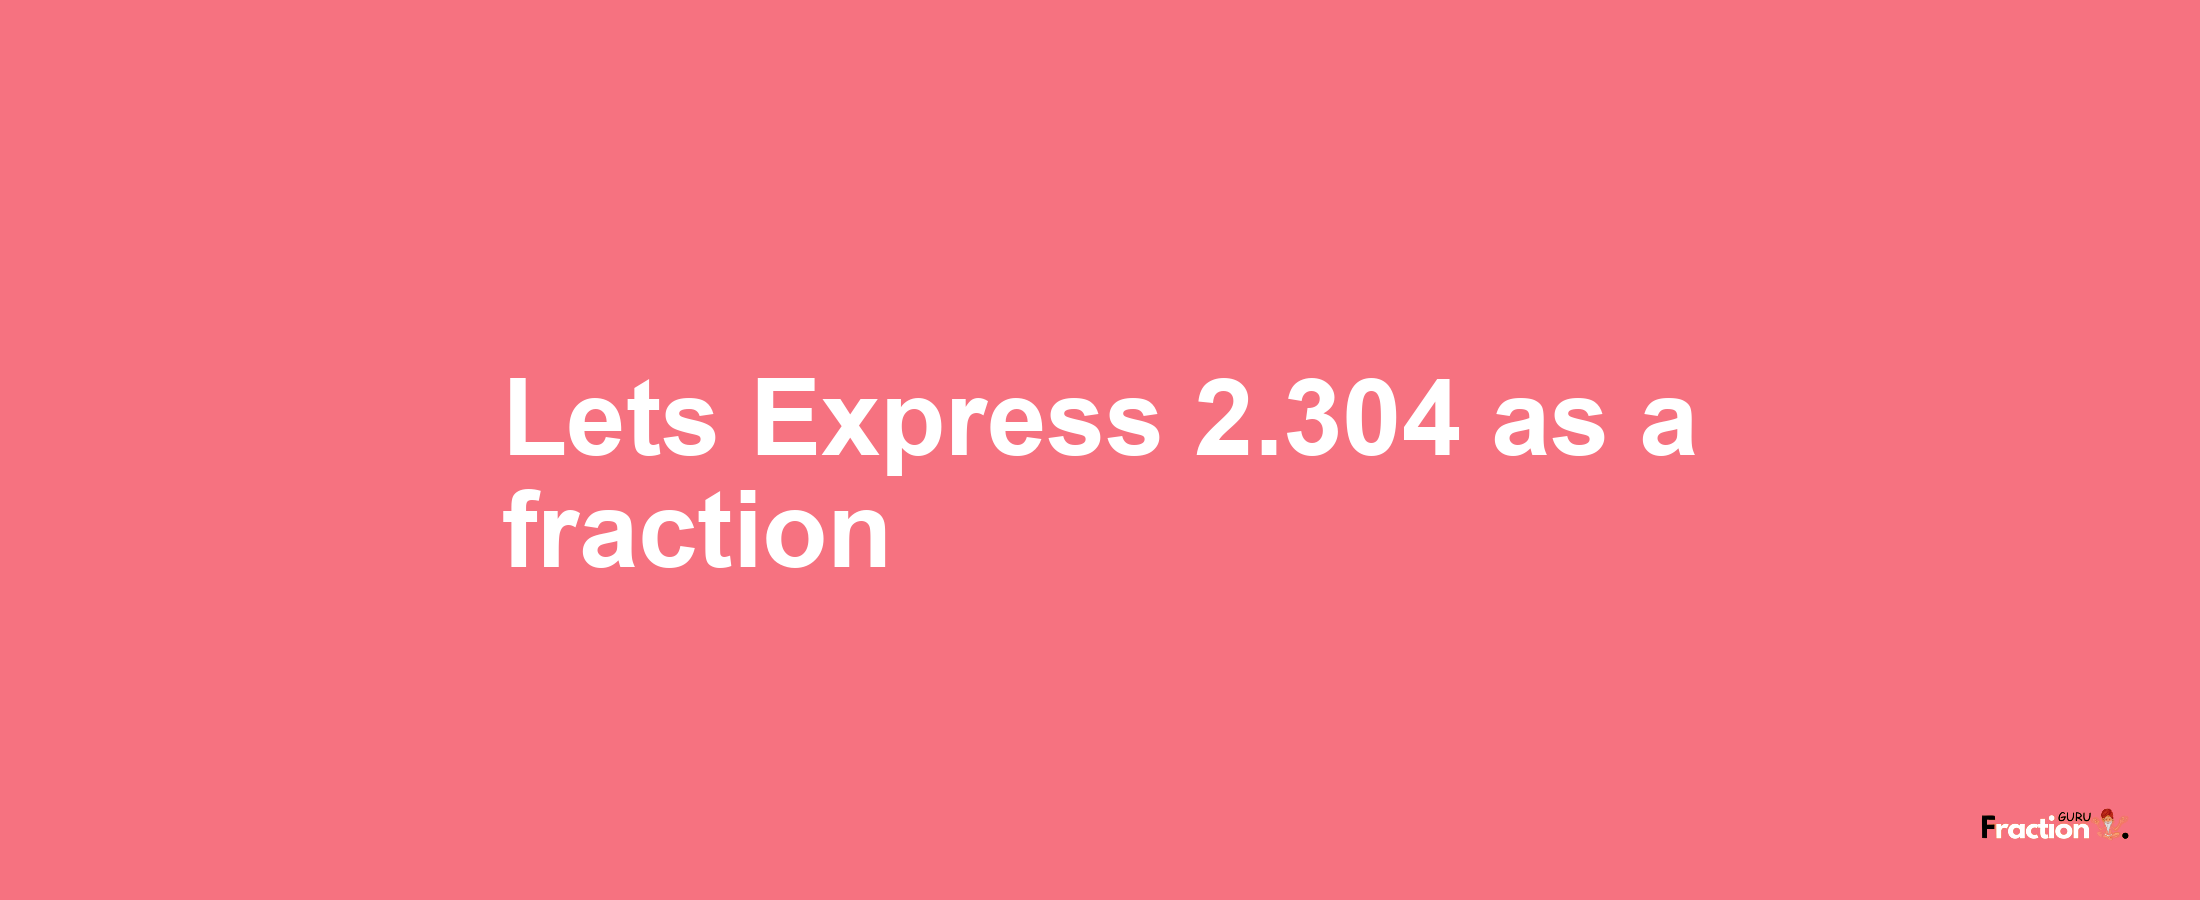 Lets Express 2.304 as afraction